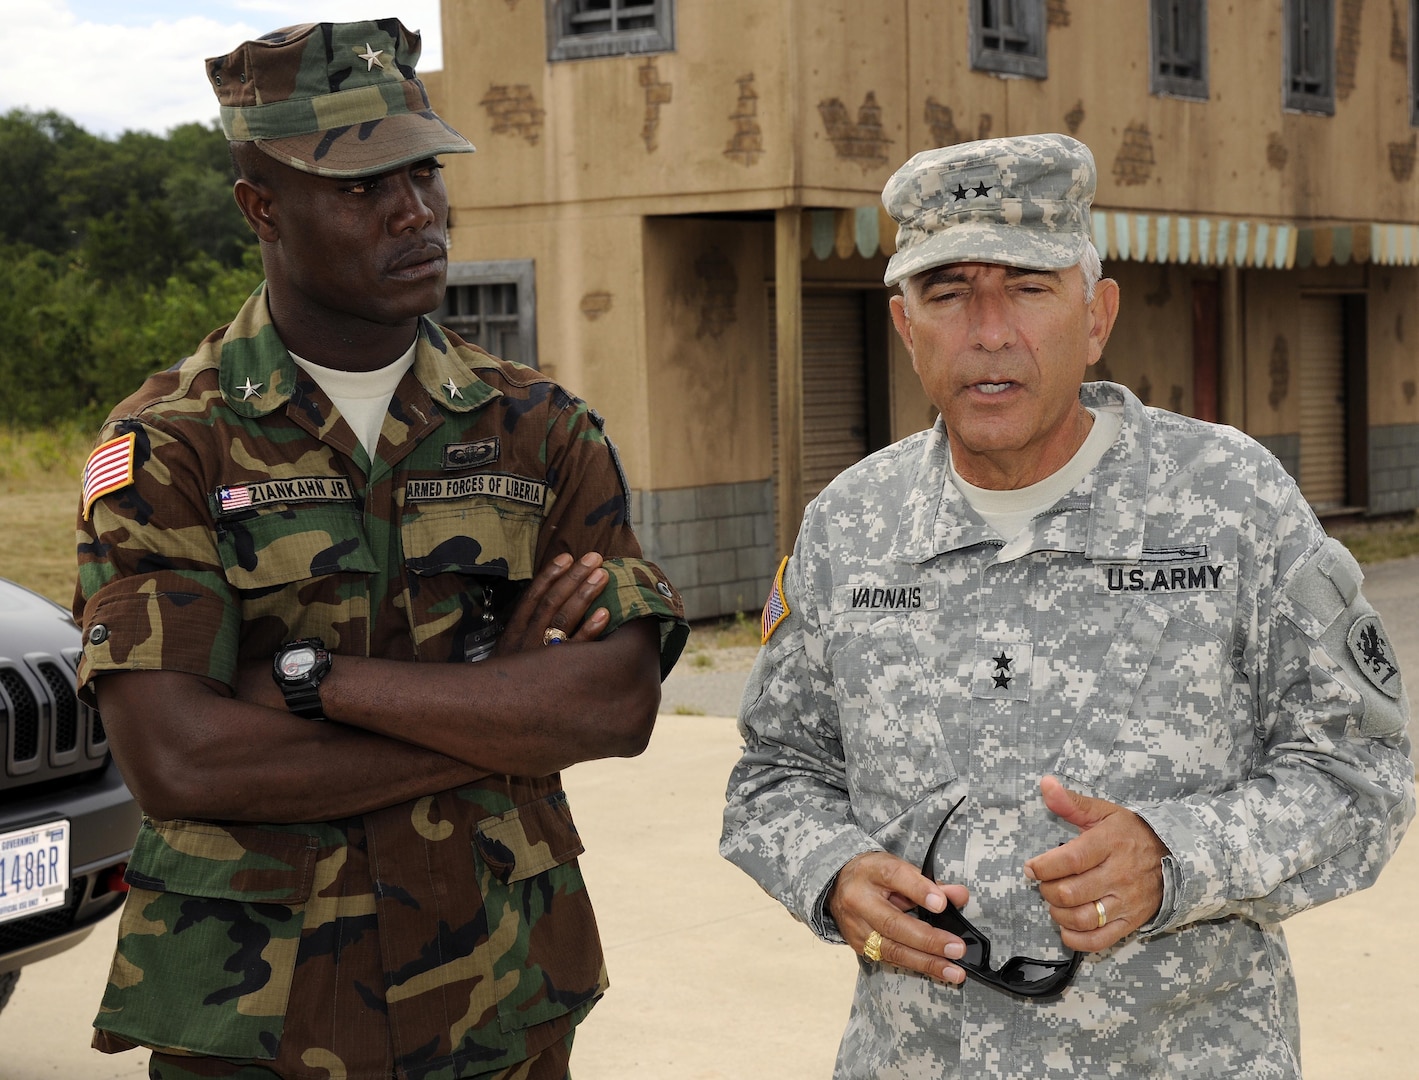 Michigan National Guard Adjutant General Maj. Gen. Gregory J. Vadnais, the adjutant general of Michigan, speaks with Brig. Gen. Daniel D. Ziankahn Jr., chief of staff of the Armed Forces of Liberia, at the counter-improvised explosive device range at the Camp Grayling Joint Maneuver Training Center in Grayling, Michigan, Aug. 2, 2015. Michigan and Liberia have been partners under the U.S. National Guard’s State Partnership Program since 2009. 